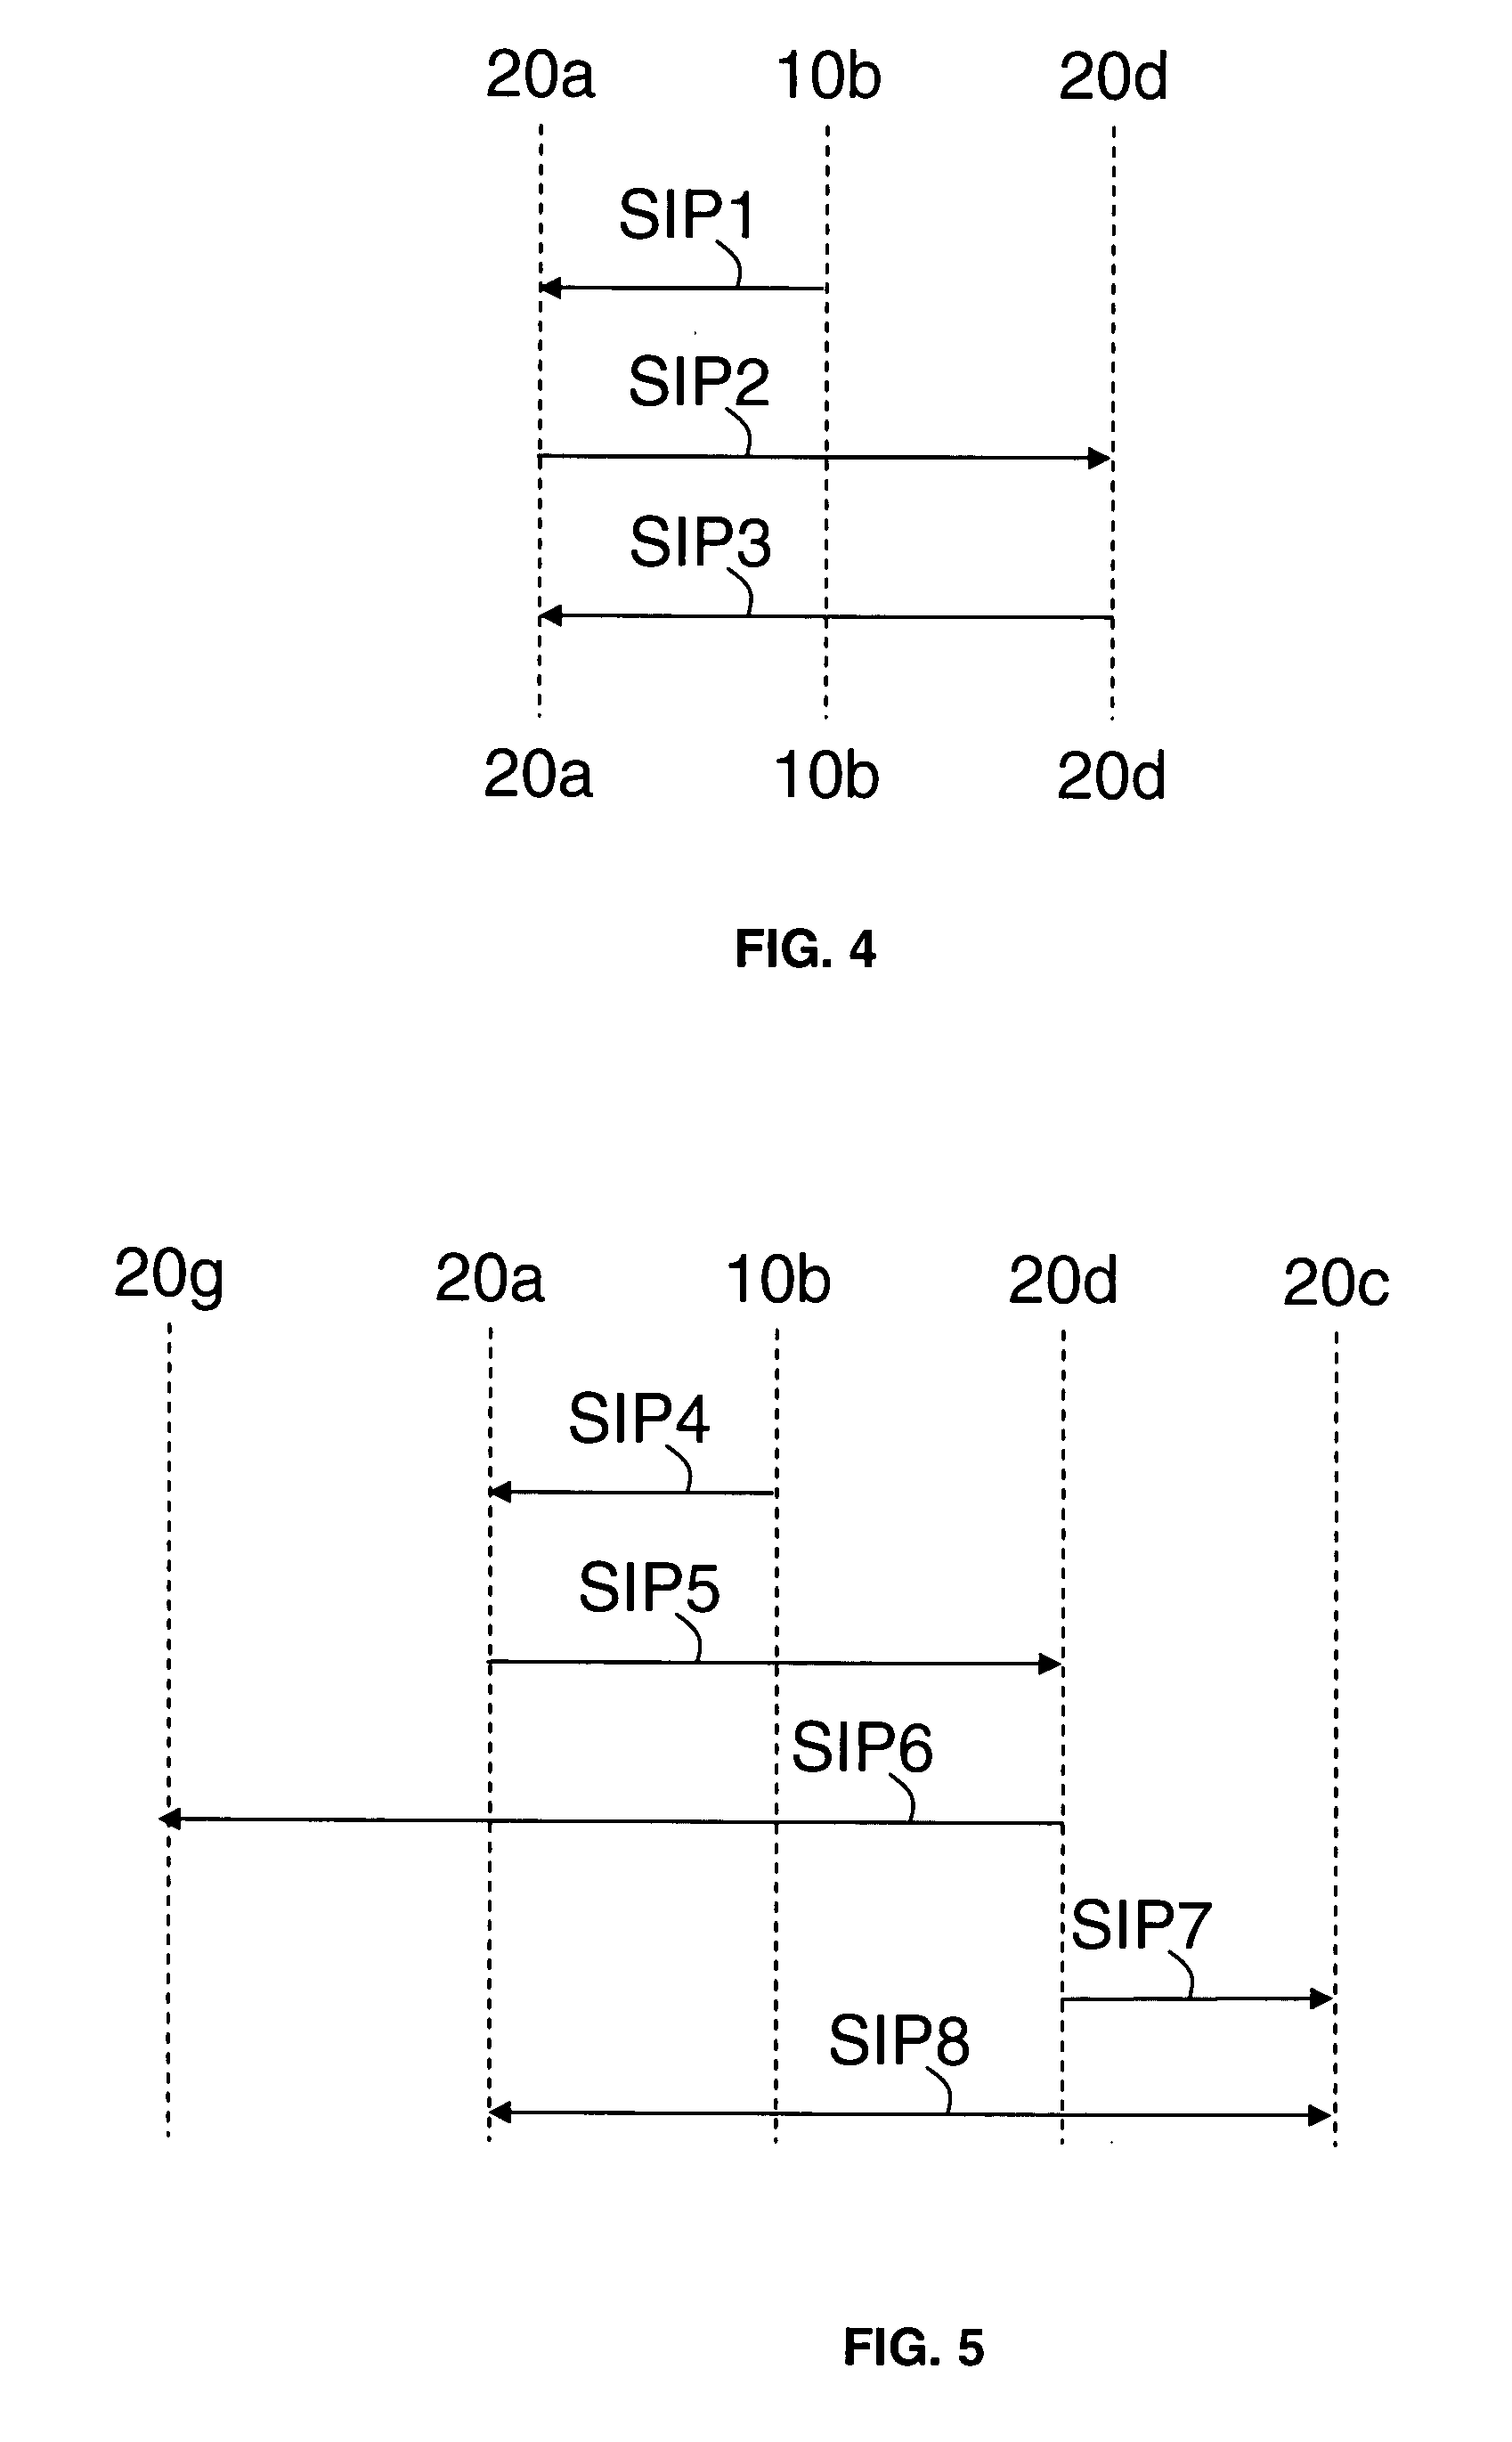 System and Method For Establishment of a Client/Server Type Relationship in a Pair-To-Pair Network